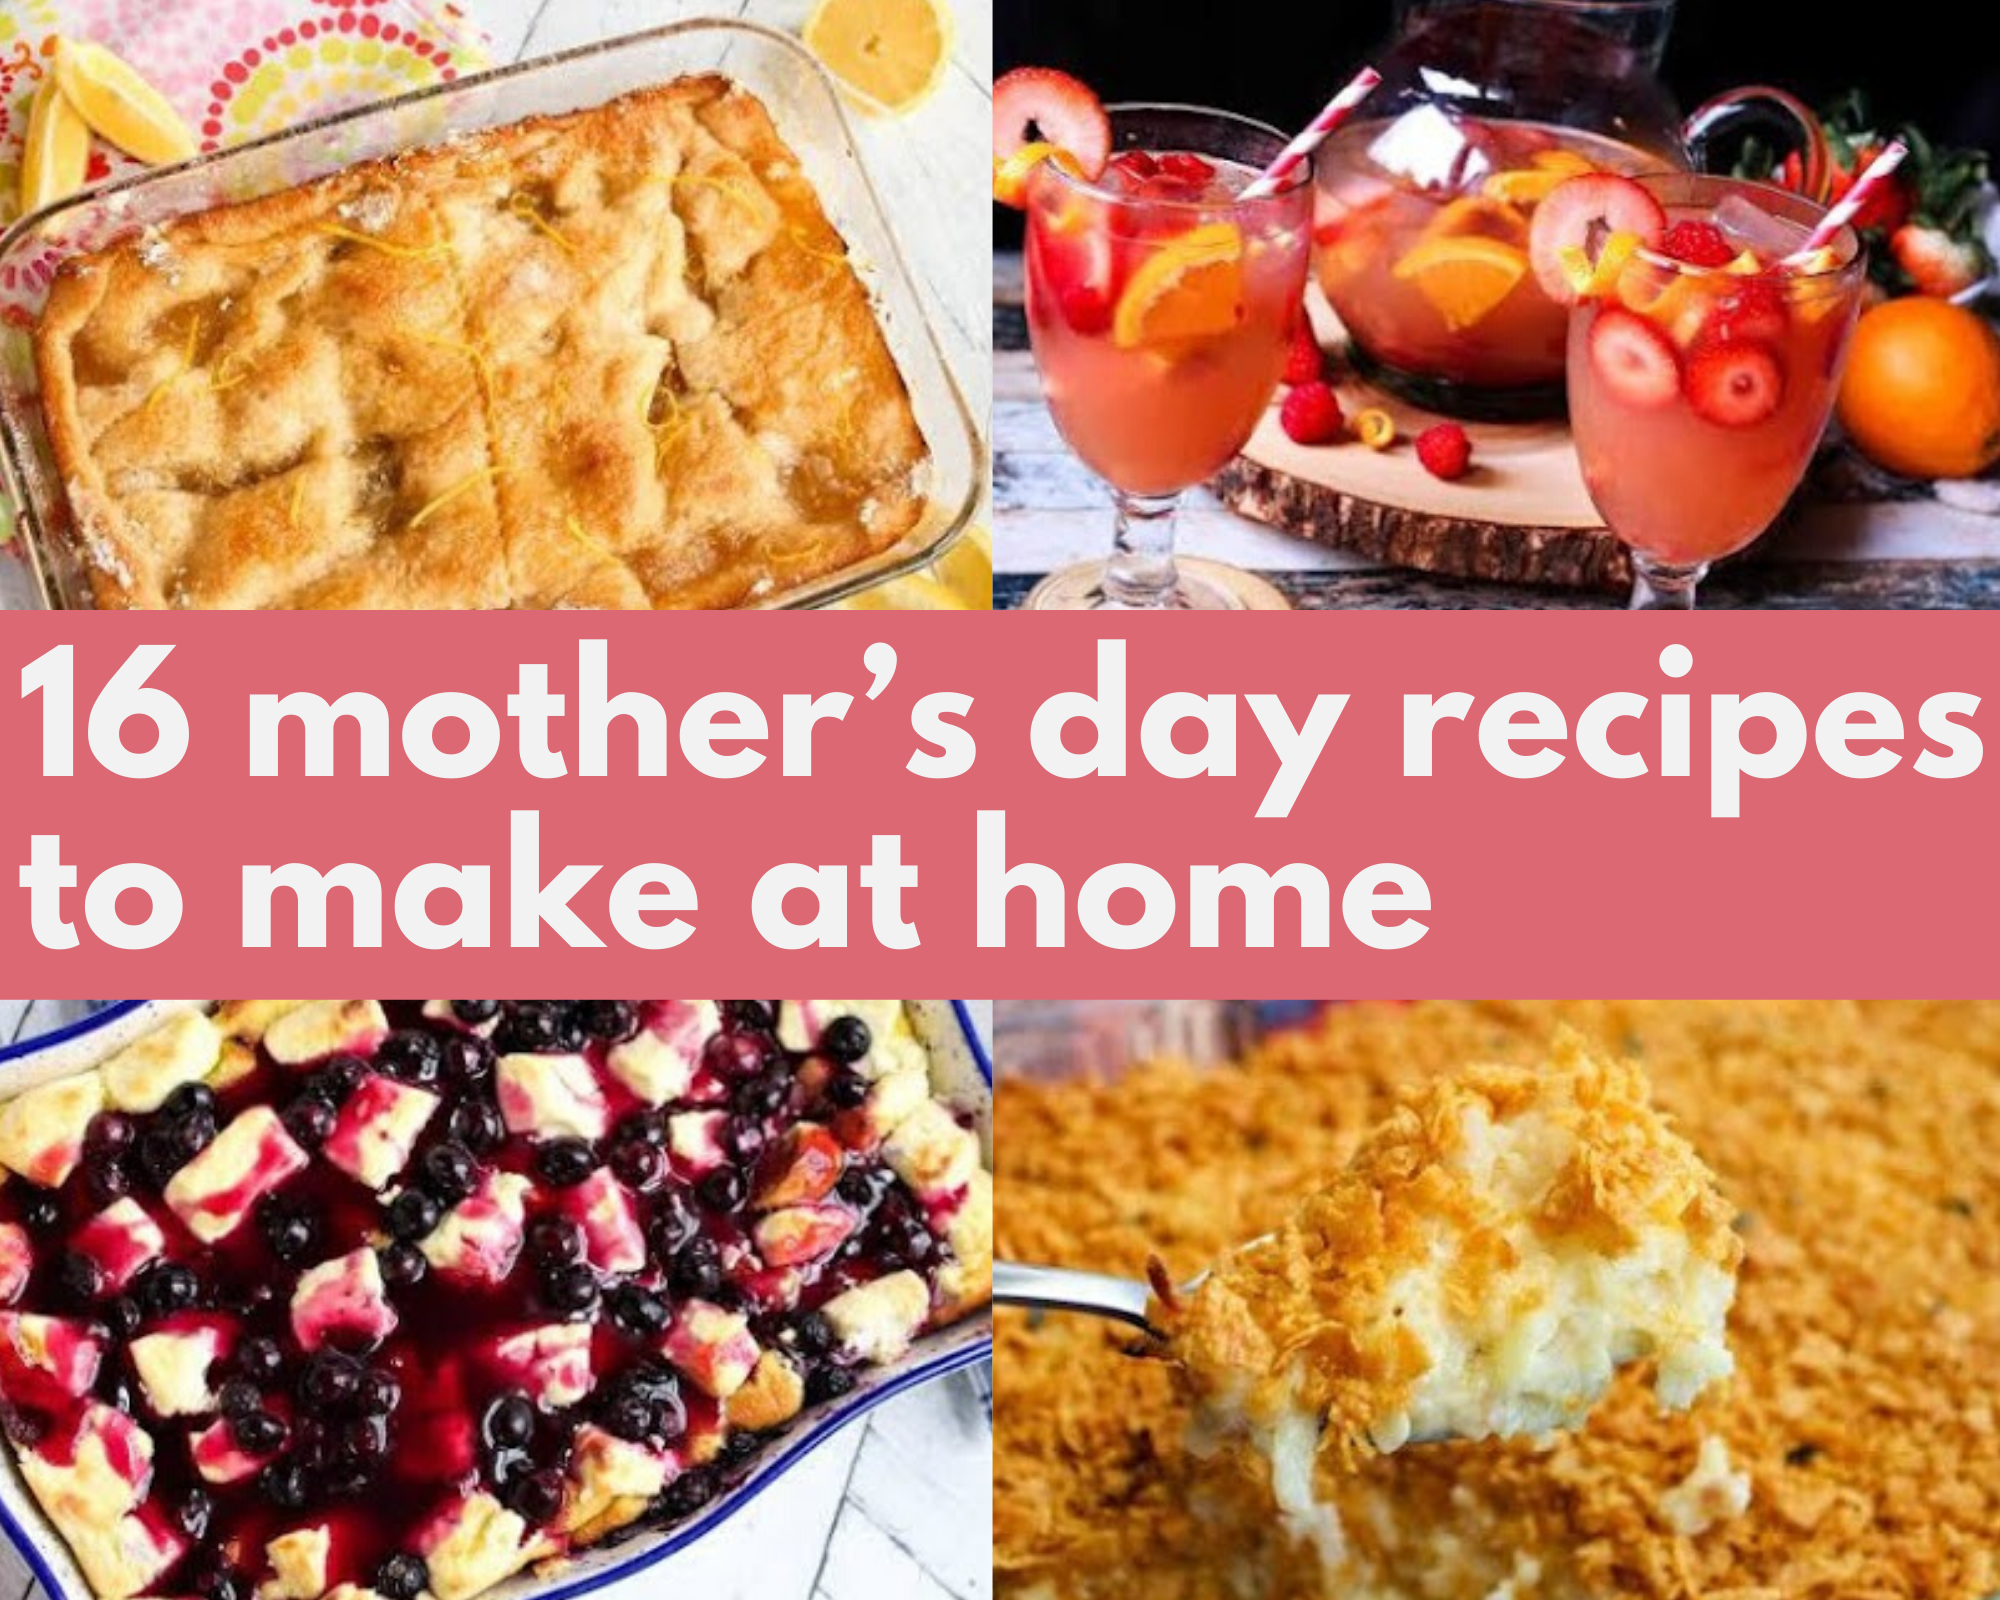 Recipes to make on Mother's Day